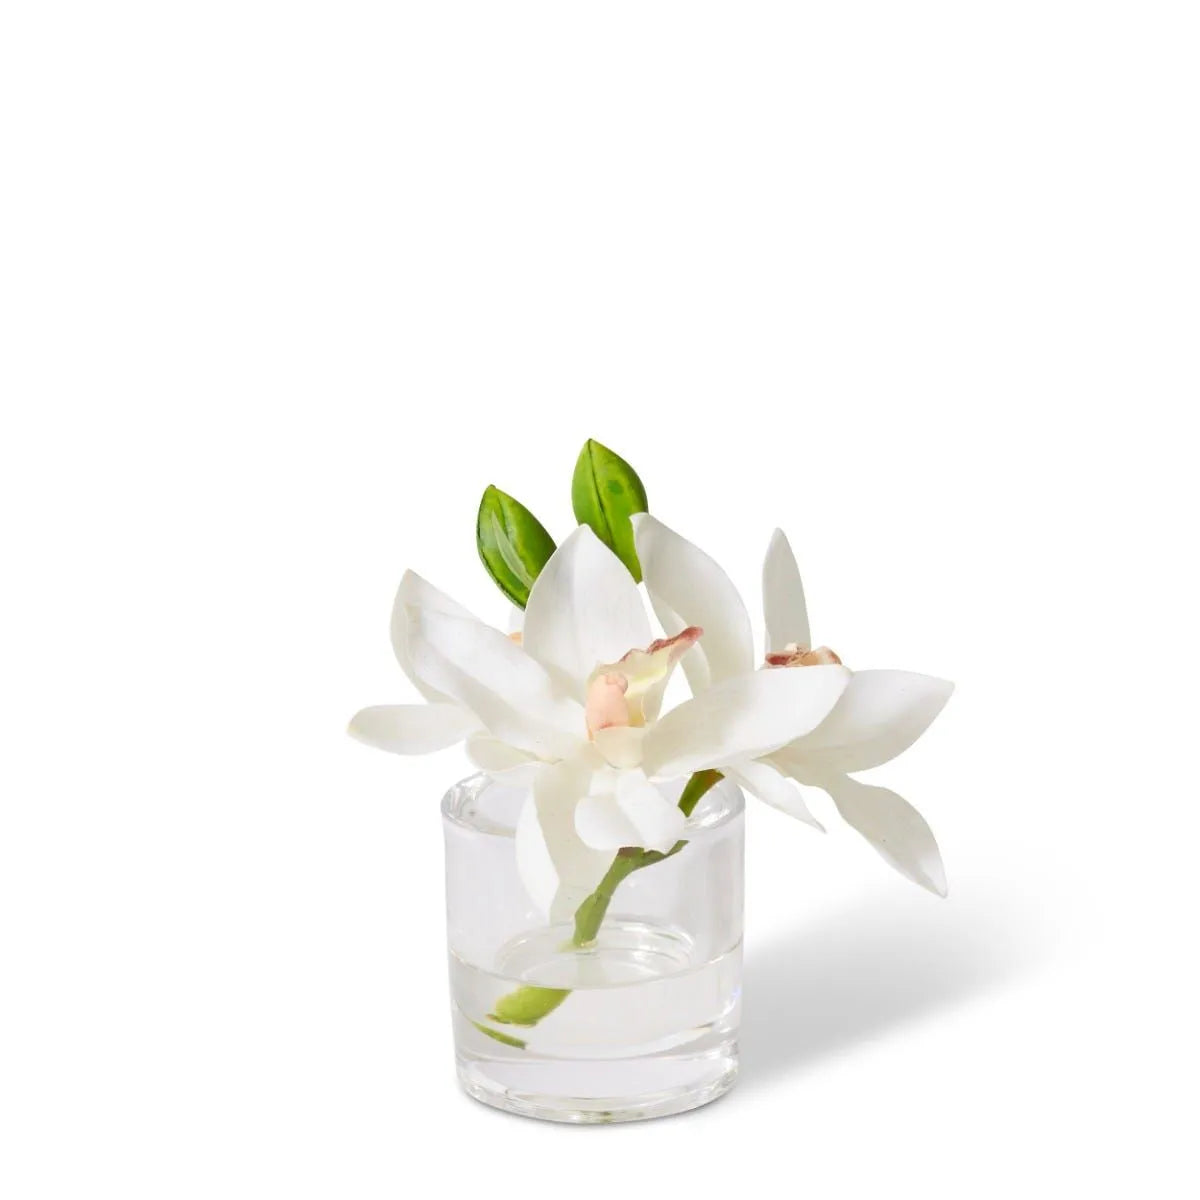 Experience elegance and exotic beauty with this white Cymbidium Orchid in a vase. Its exotic look and stylish pot make it the perfect addition to any living space. Boost your interior decor with this gorgeous flower.